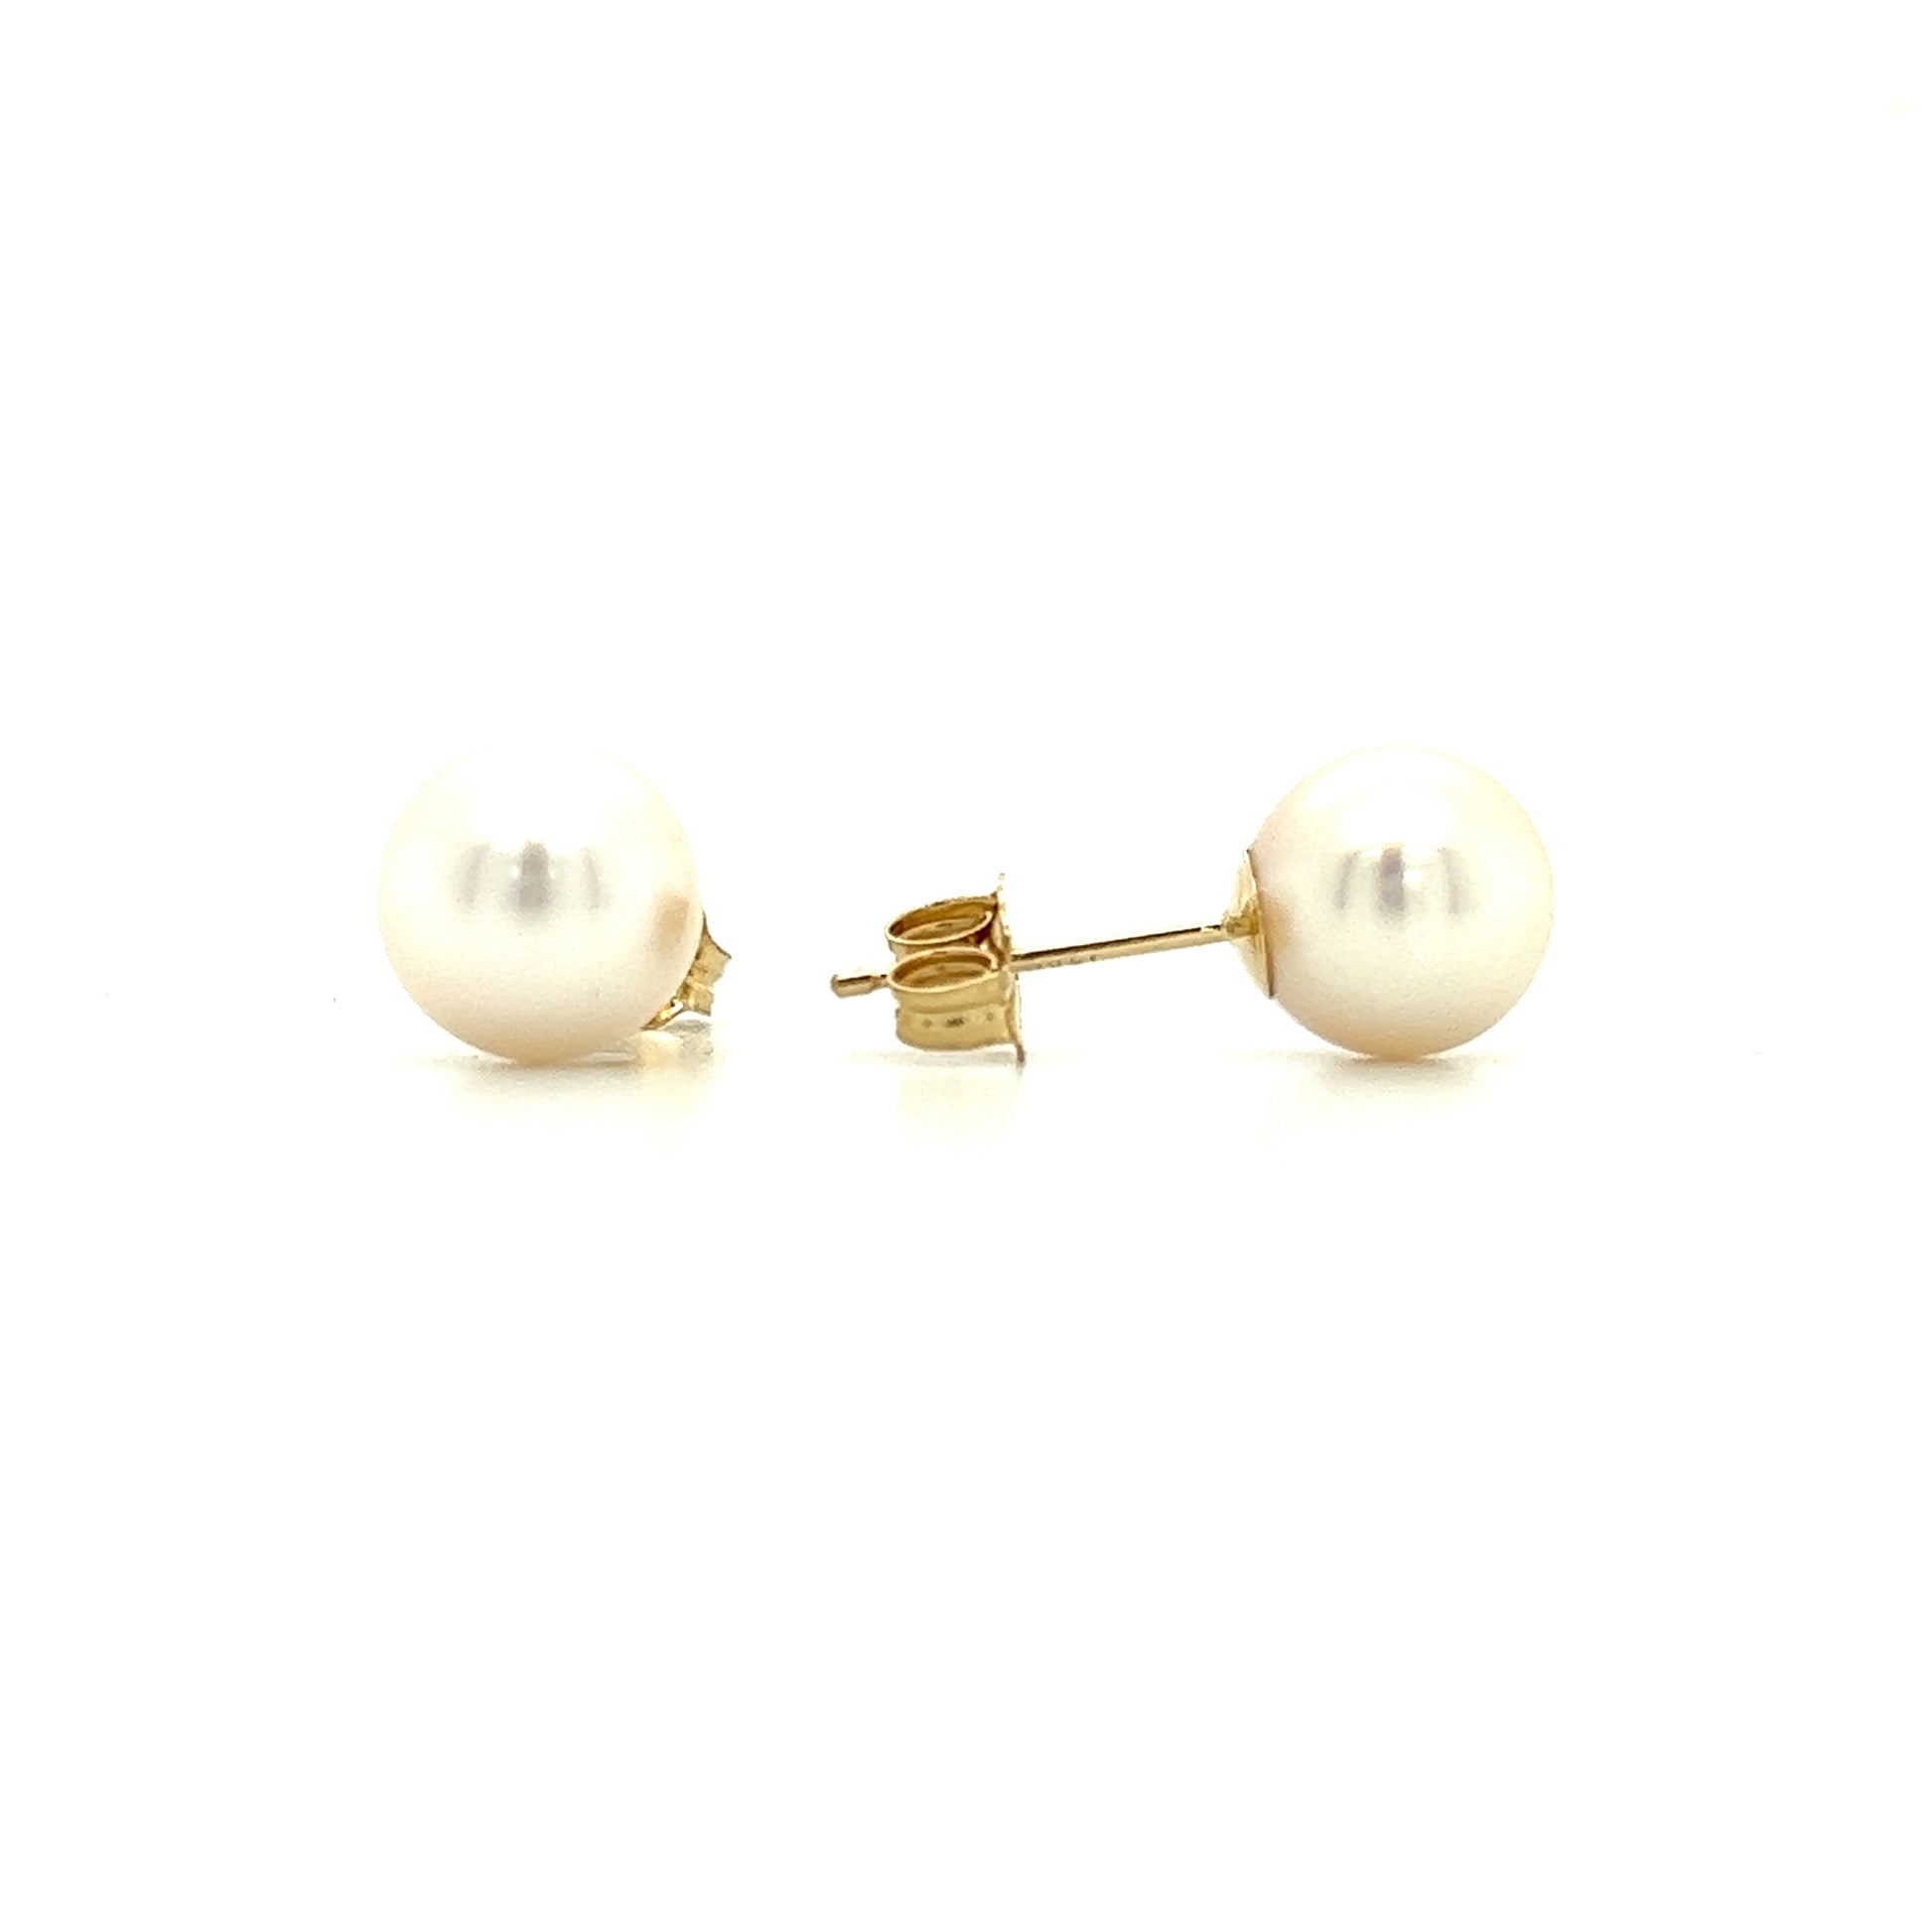 Pearl 7mm Stud Earrings in 14K Yellow Gold Front and Side View